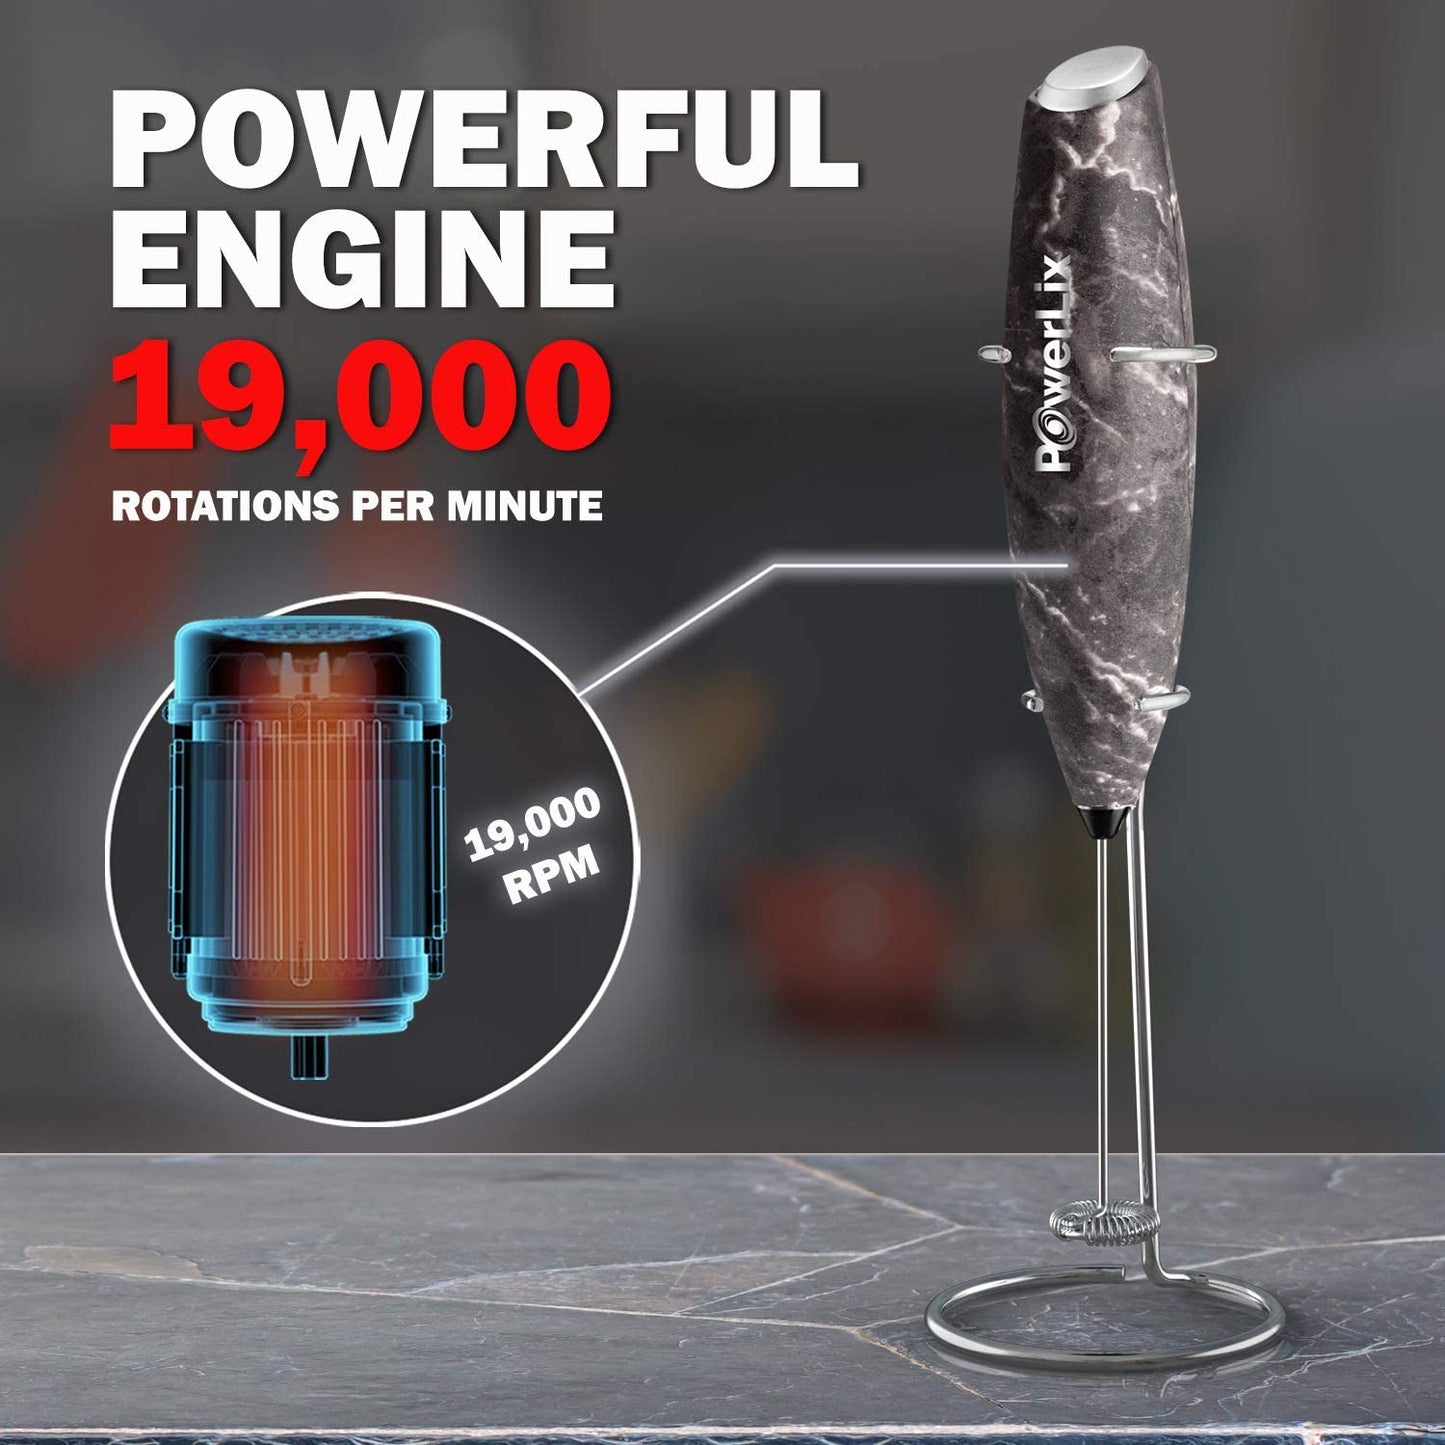 a black and white object on a stand with text: 'POWERFUL ENGINE 19,000 PowerLix ROTATIONS PER MINUTE 19,000 RPM'